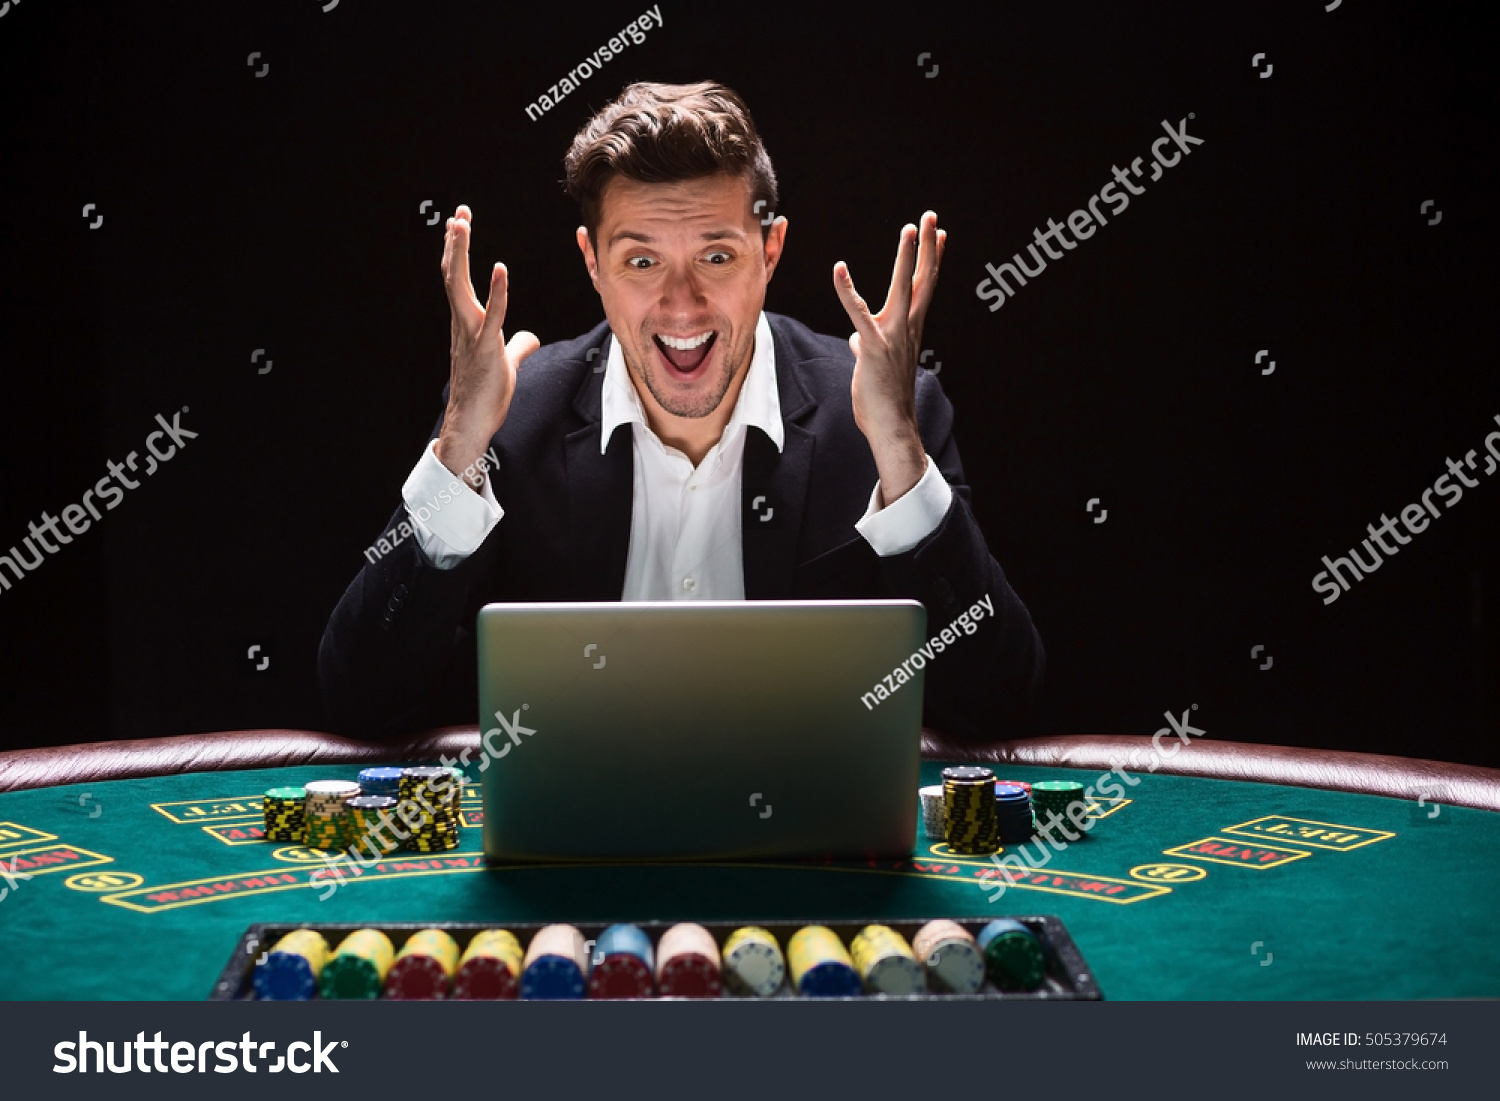 Online poker players sitting at the table